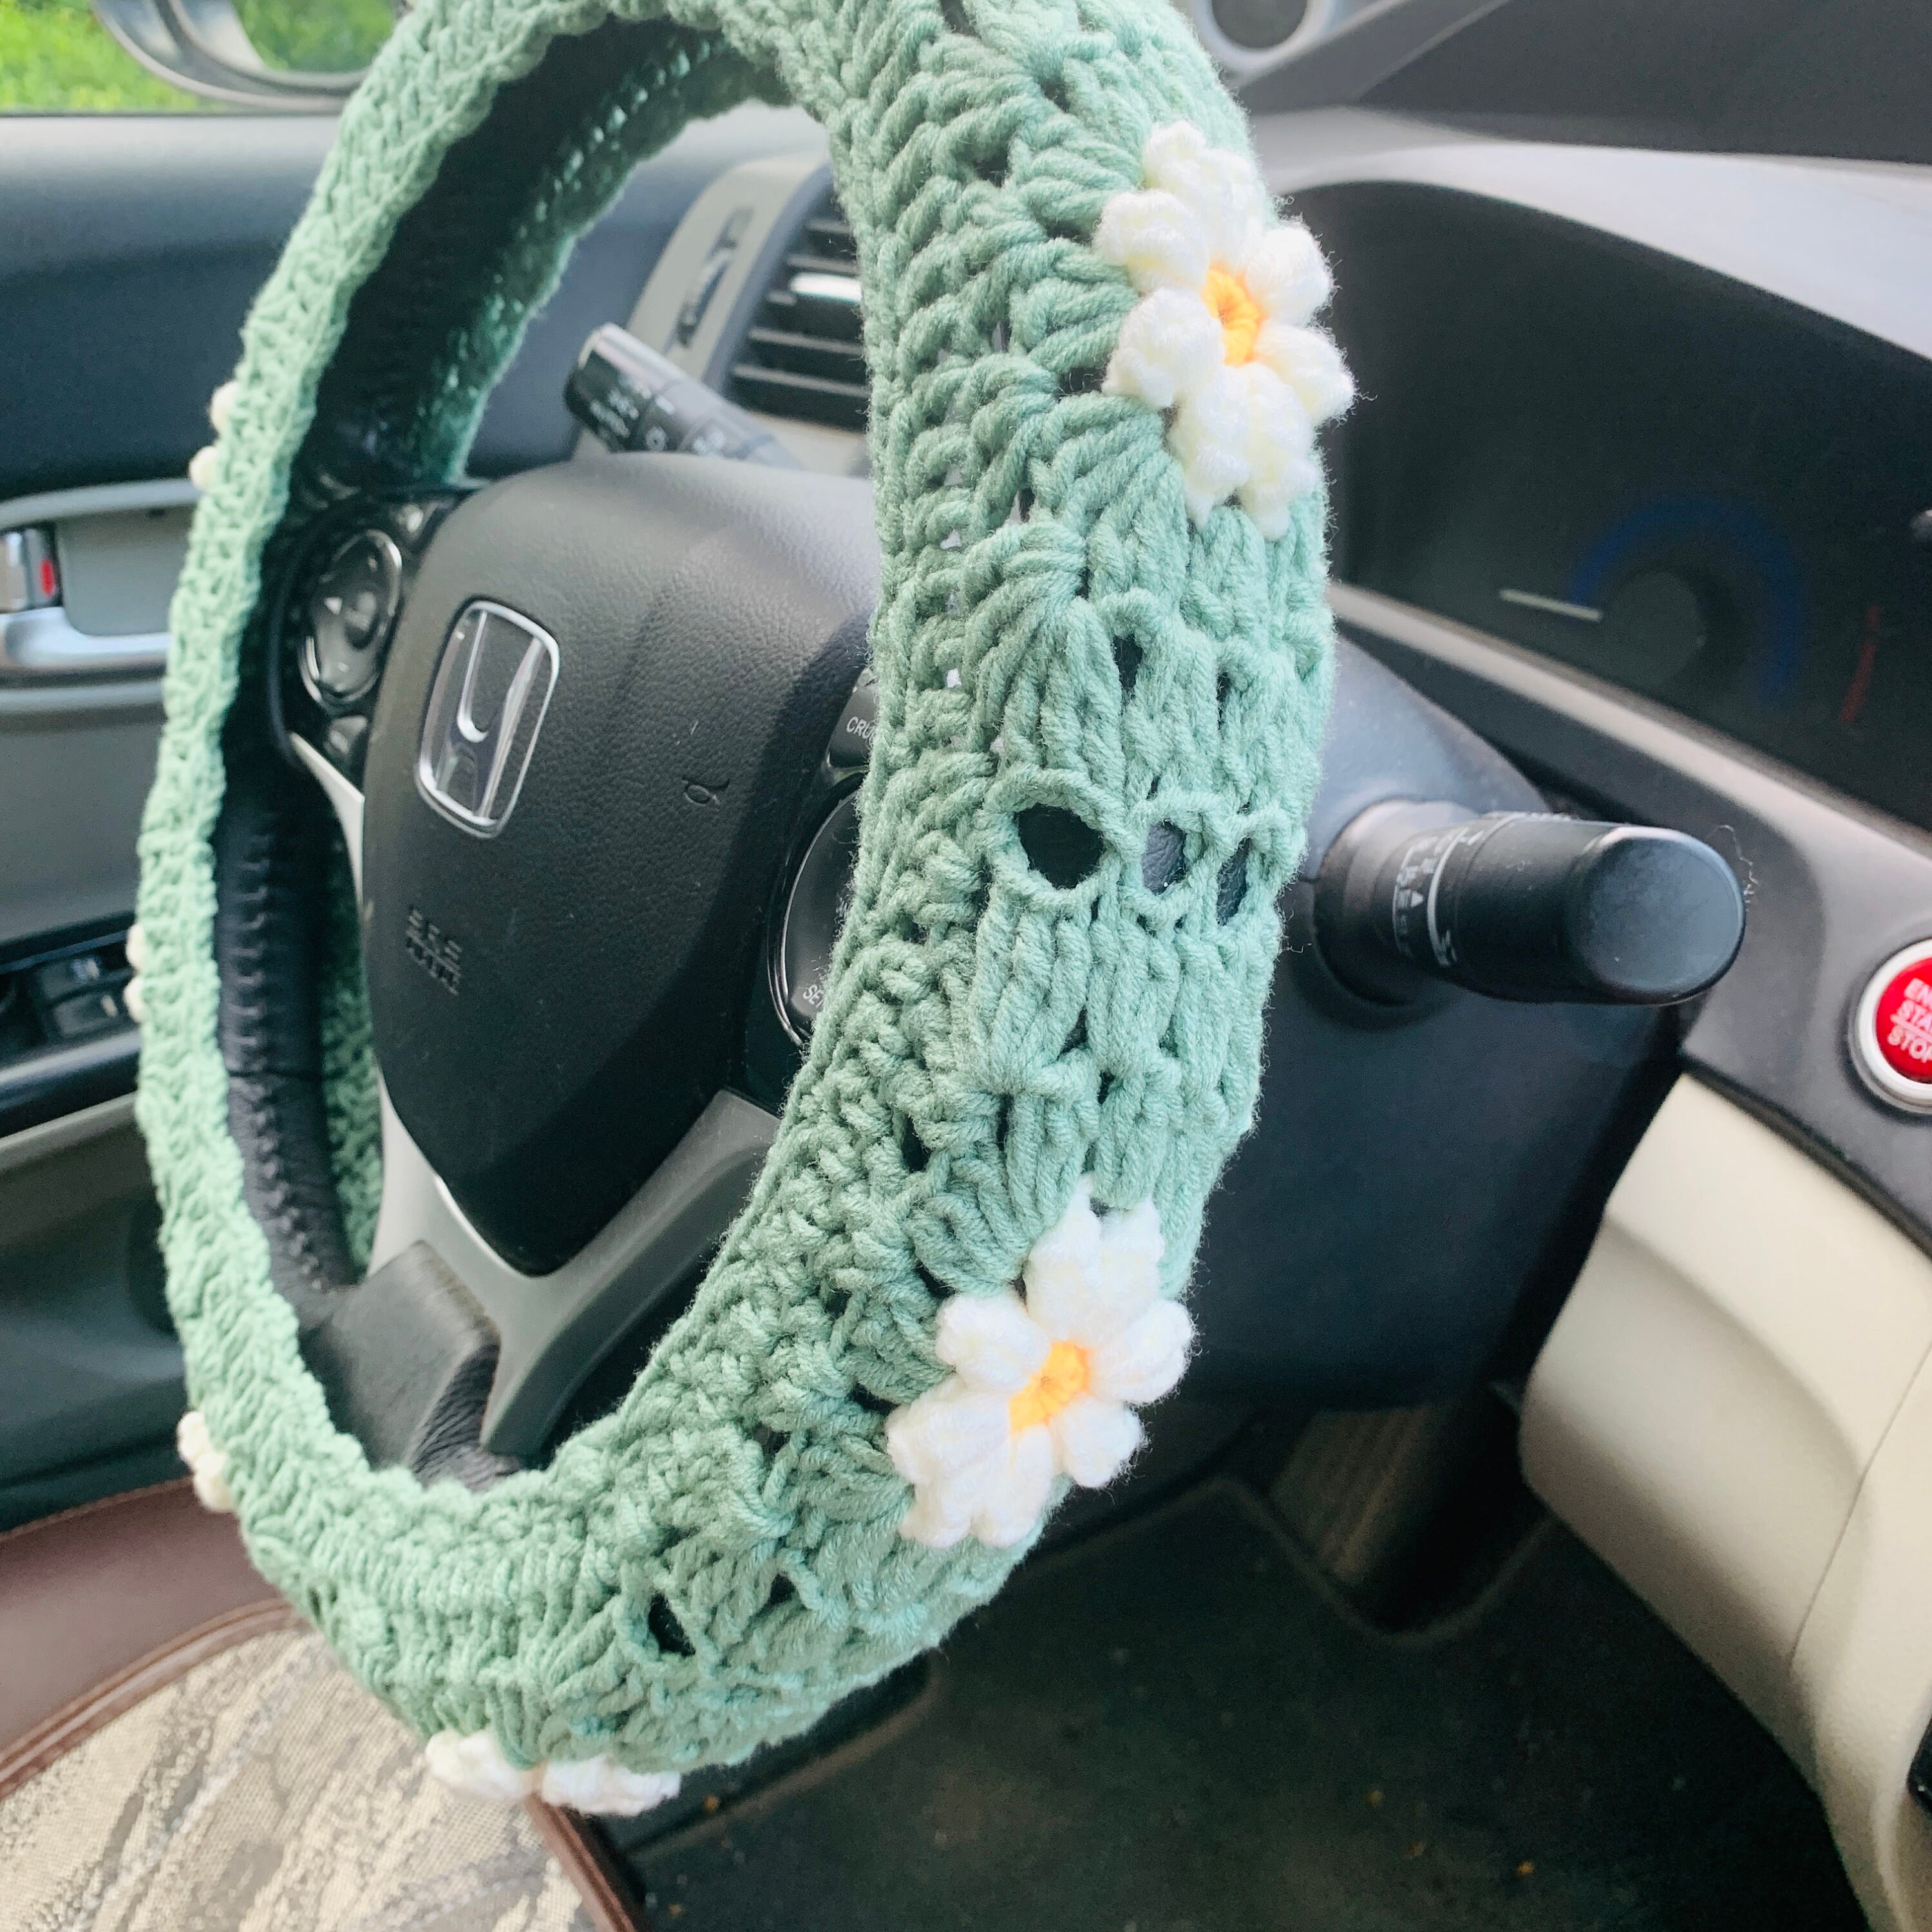 GePrint Daisy Car Steering Wheel Cover Safety Seat Belt Pads 3 Pieces Set  with Adjustable Stretch-on Fabric Covers Flower Car Interior Acceesories  for